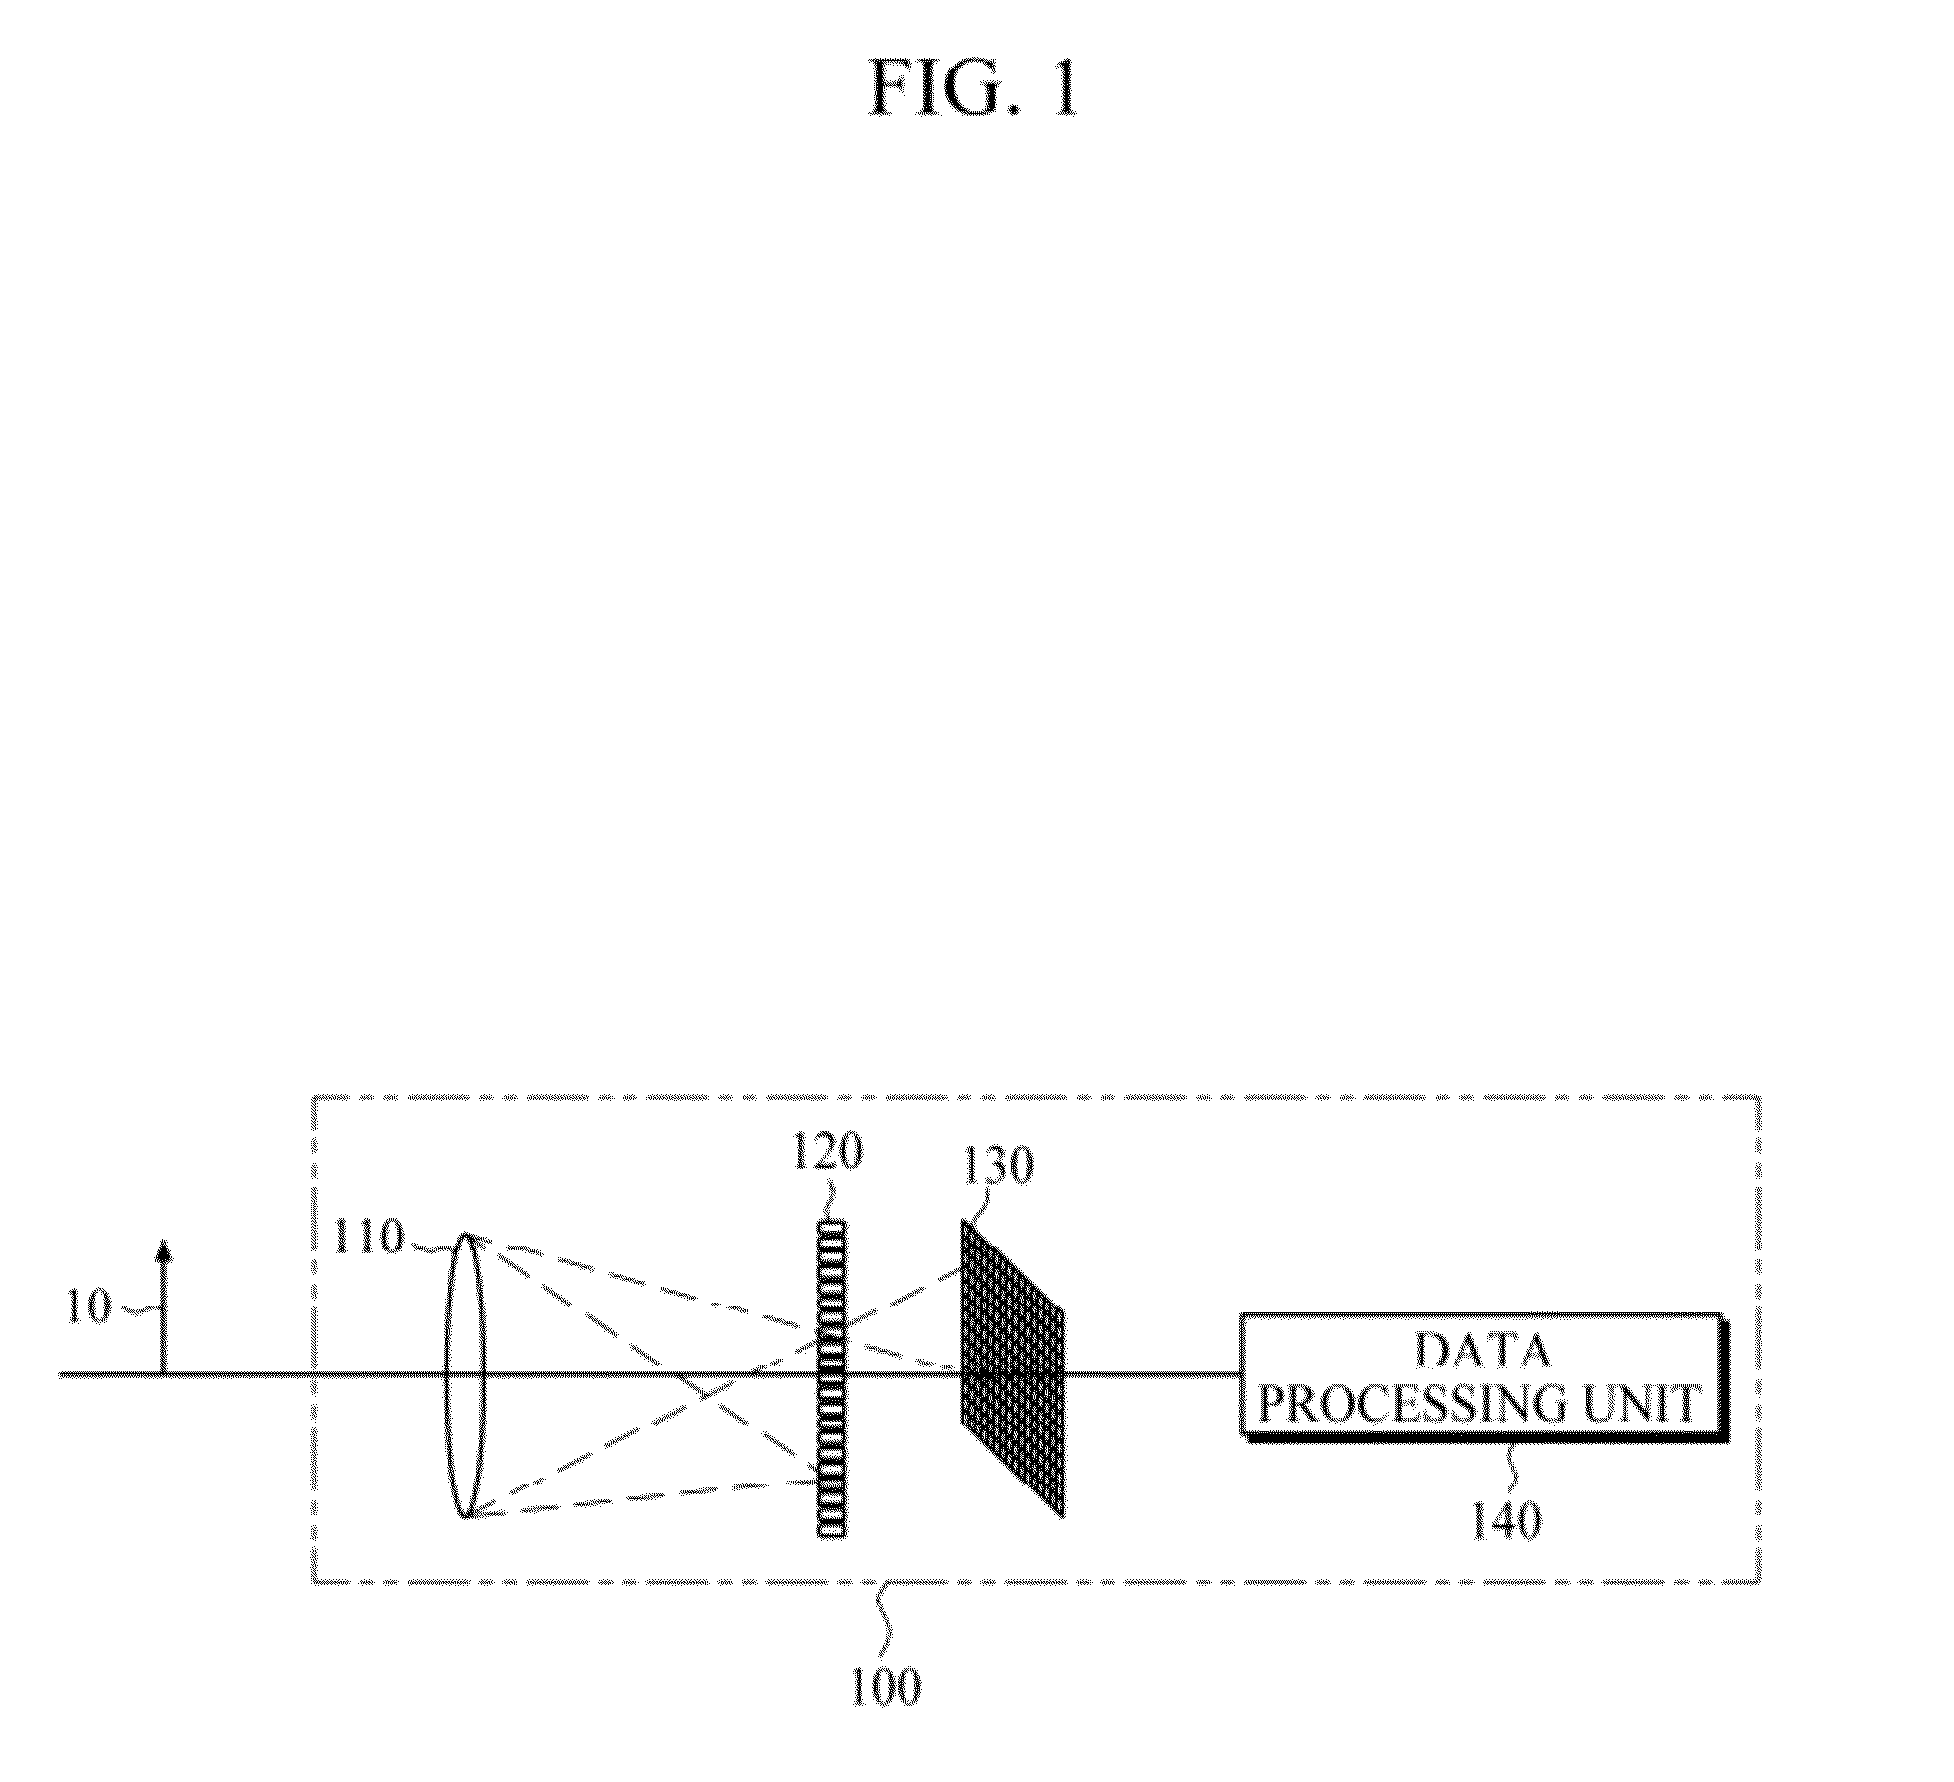 Apparatus and method for processing light field data using a mask with an attenuation pattern